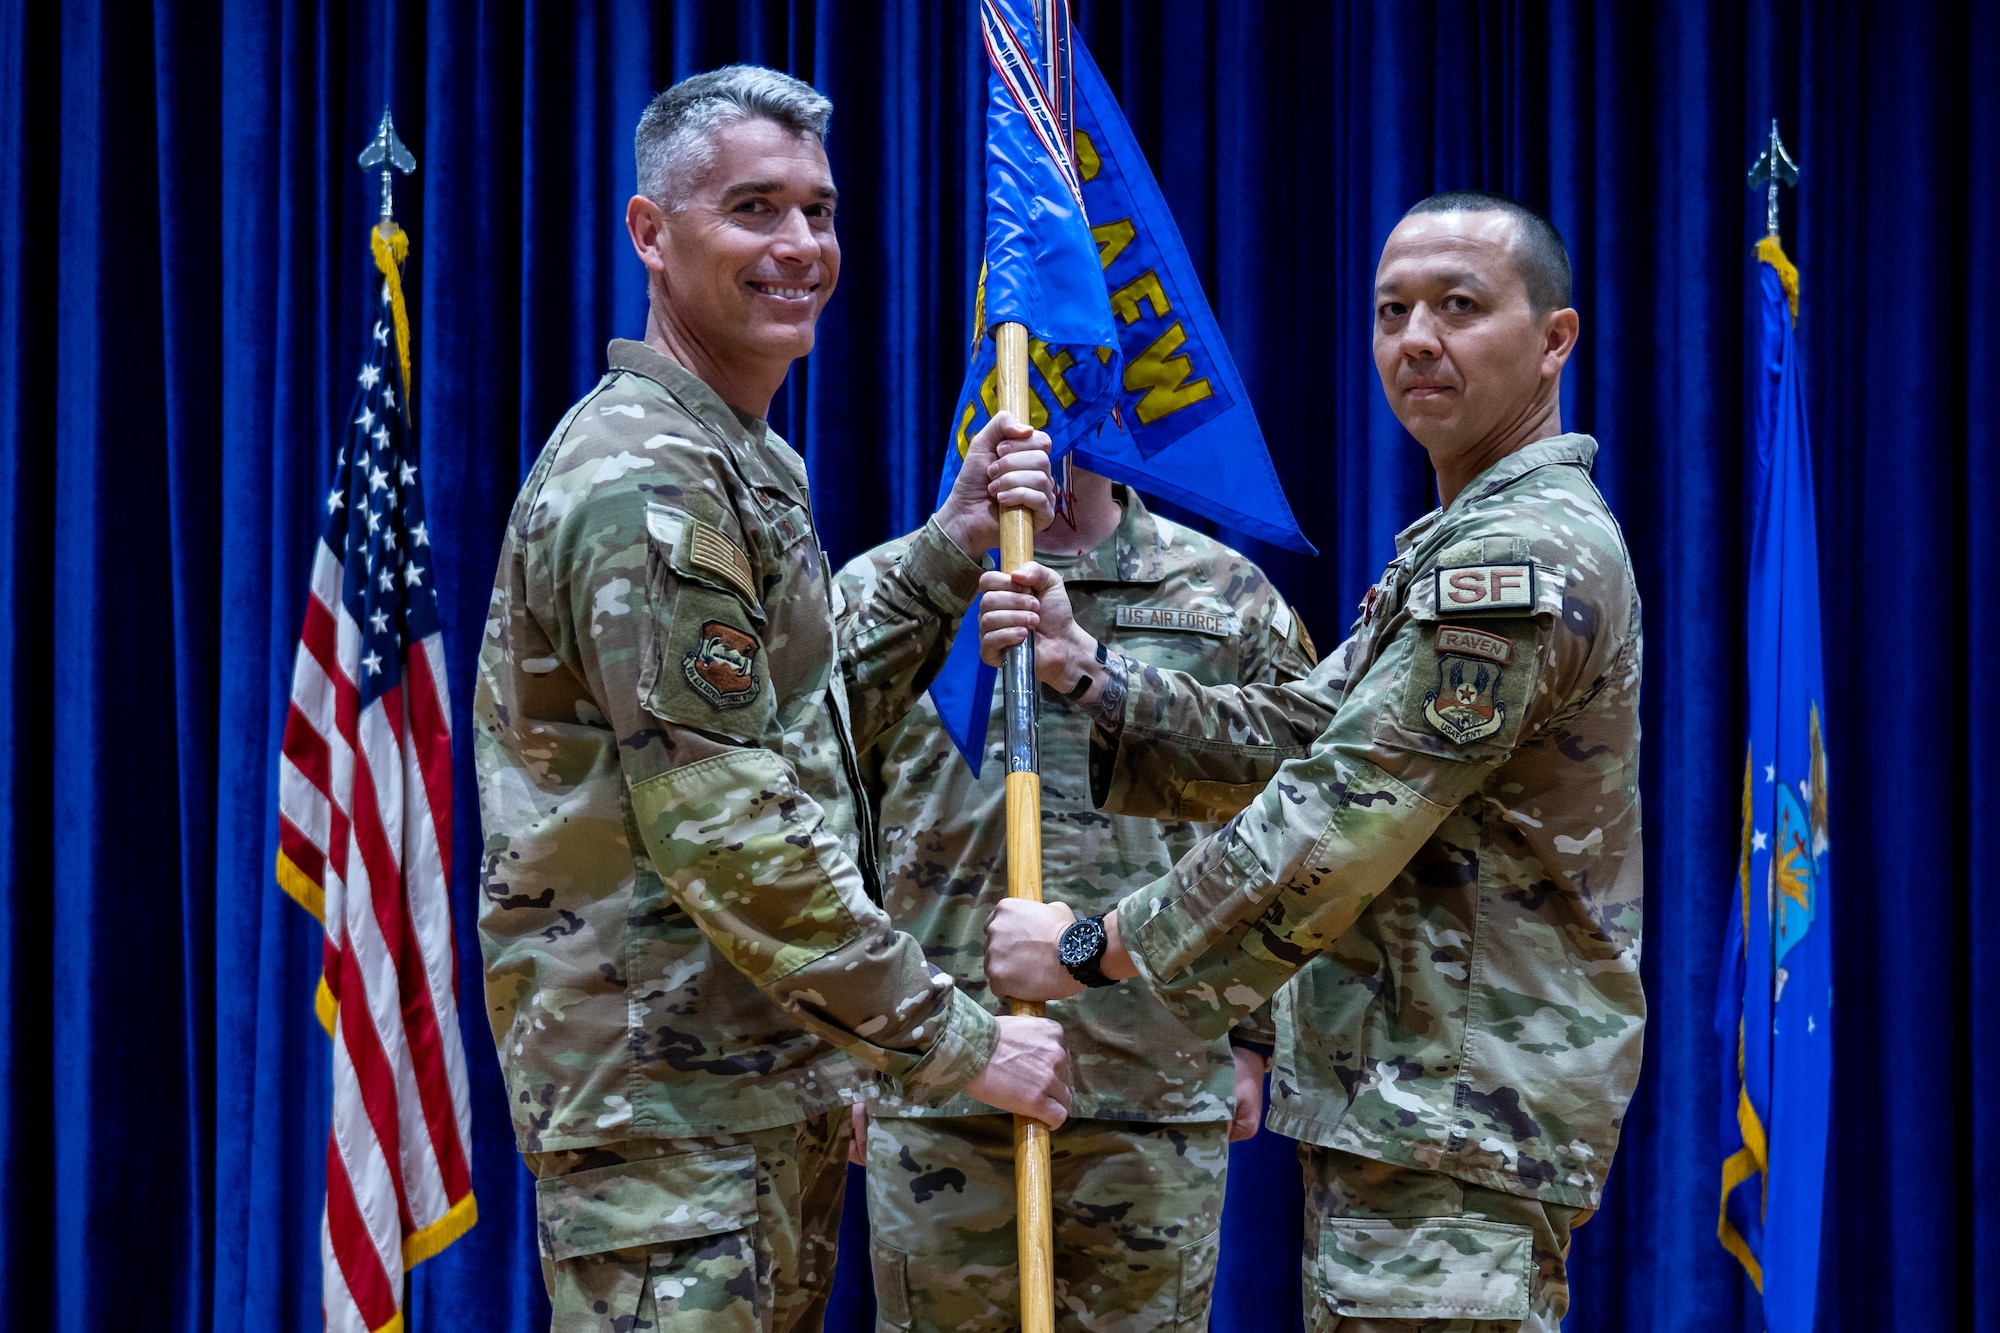 U.S. Air Force Lt. Col. Tito Ruiz, outgoing 386th Expeditionary Security Forces Squadron commander, passes the guidon to Col. George Buch, Jr., 386th Air Expeditionary Wing commander, during a change of command ceremony at Ali Al Salem Air Base, Kuwait, June 23, 2023. Ruiz passed the guidon back to Buch as a symbol of relinquishing command of the unit. (U.S. Air Force photo by Staff Sgt. Kevin Long)